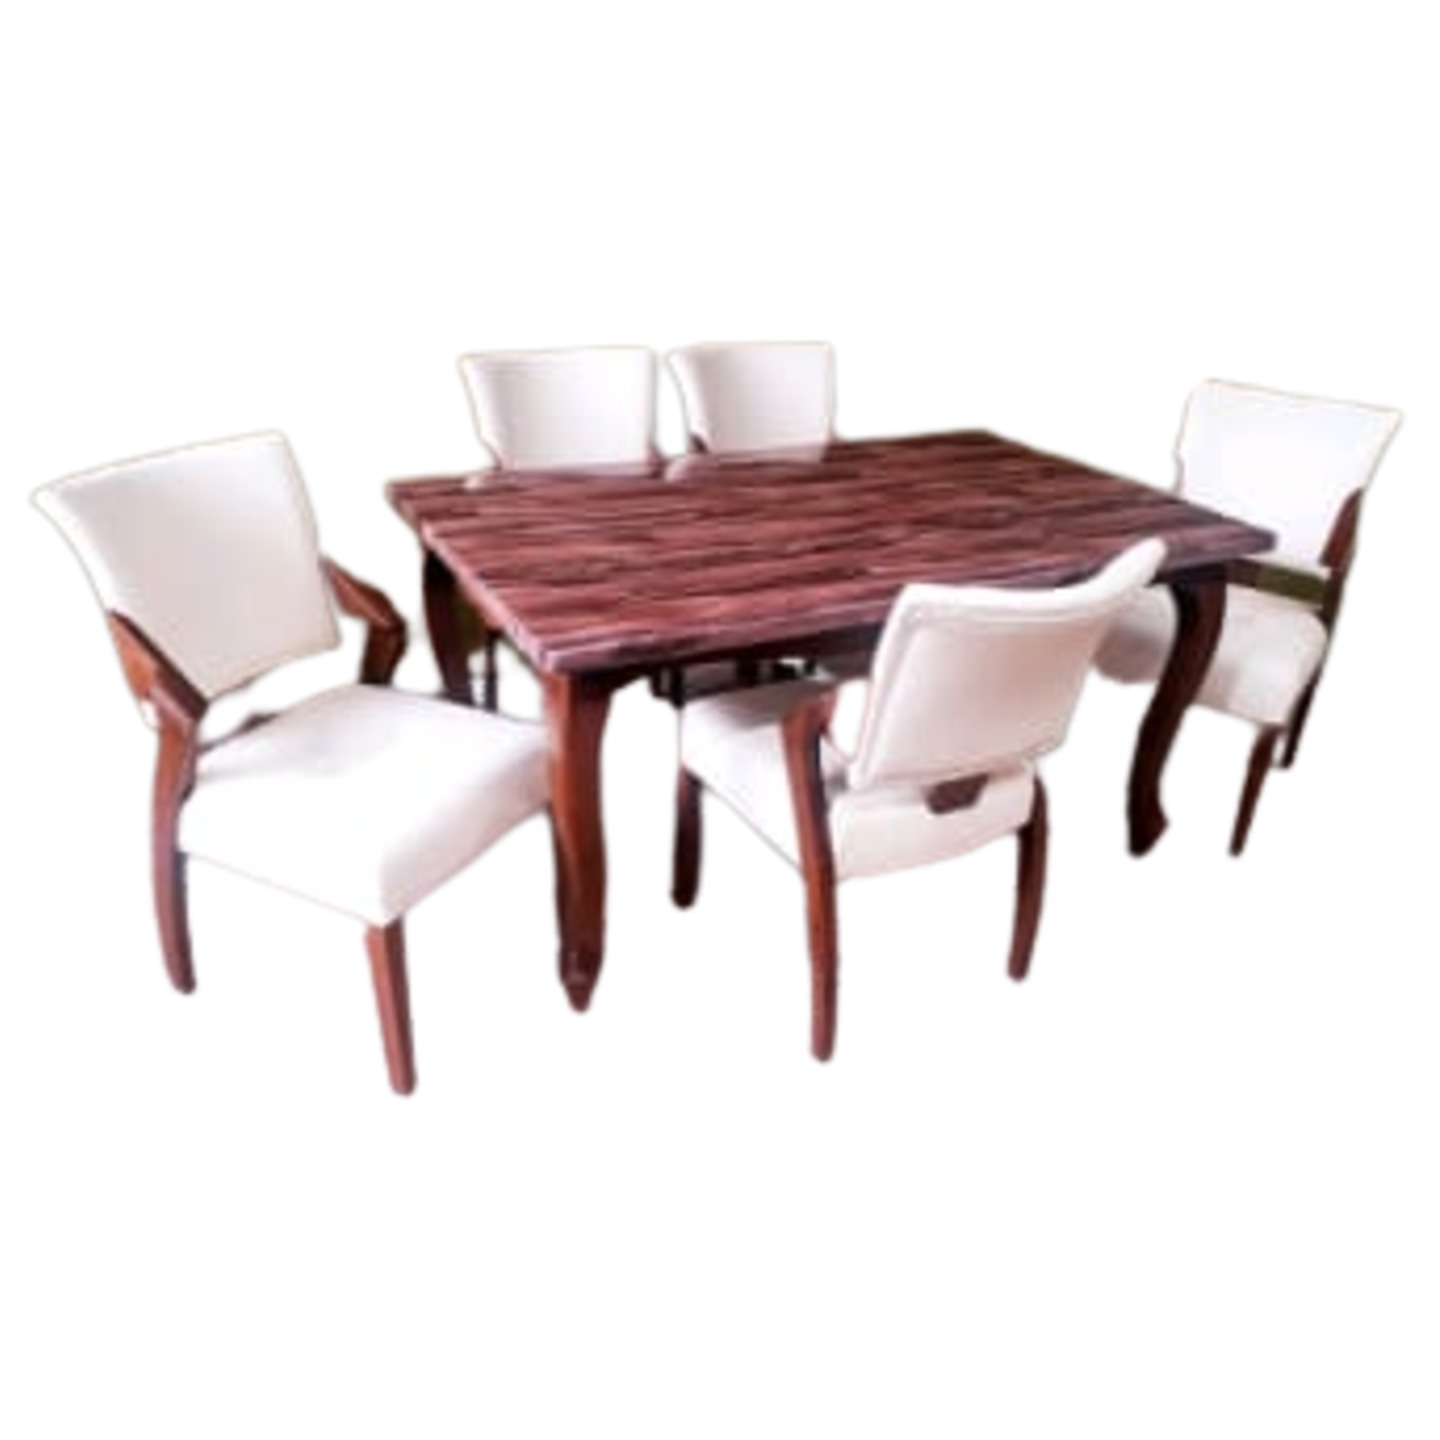 DW Marble Top H-011 Six Seater Dining Table Set in Brown Colour